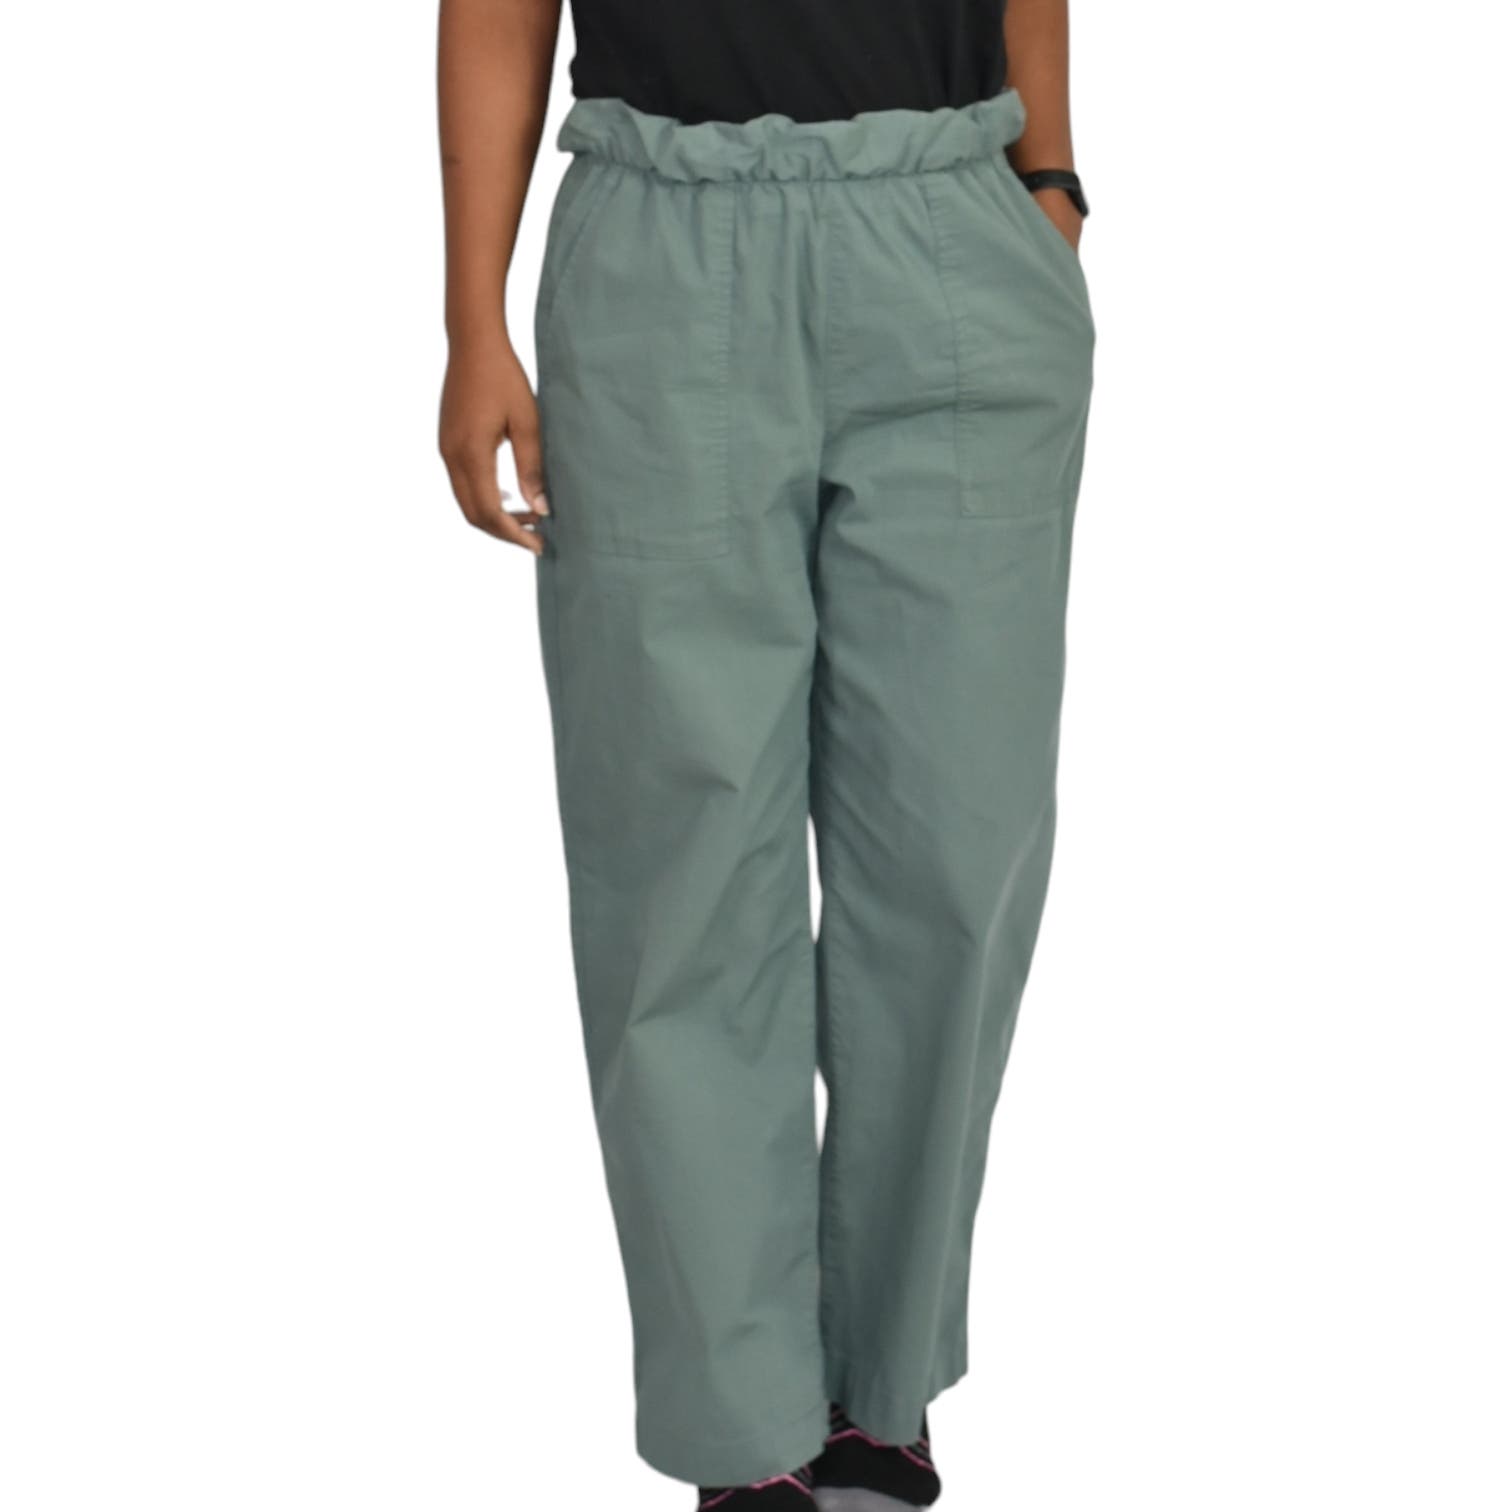 Gap Off Duty Khakis Green Olive Chino Pants Wide Leg Pull On High Waist Utility Size Small